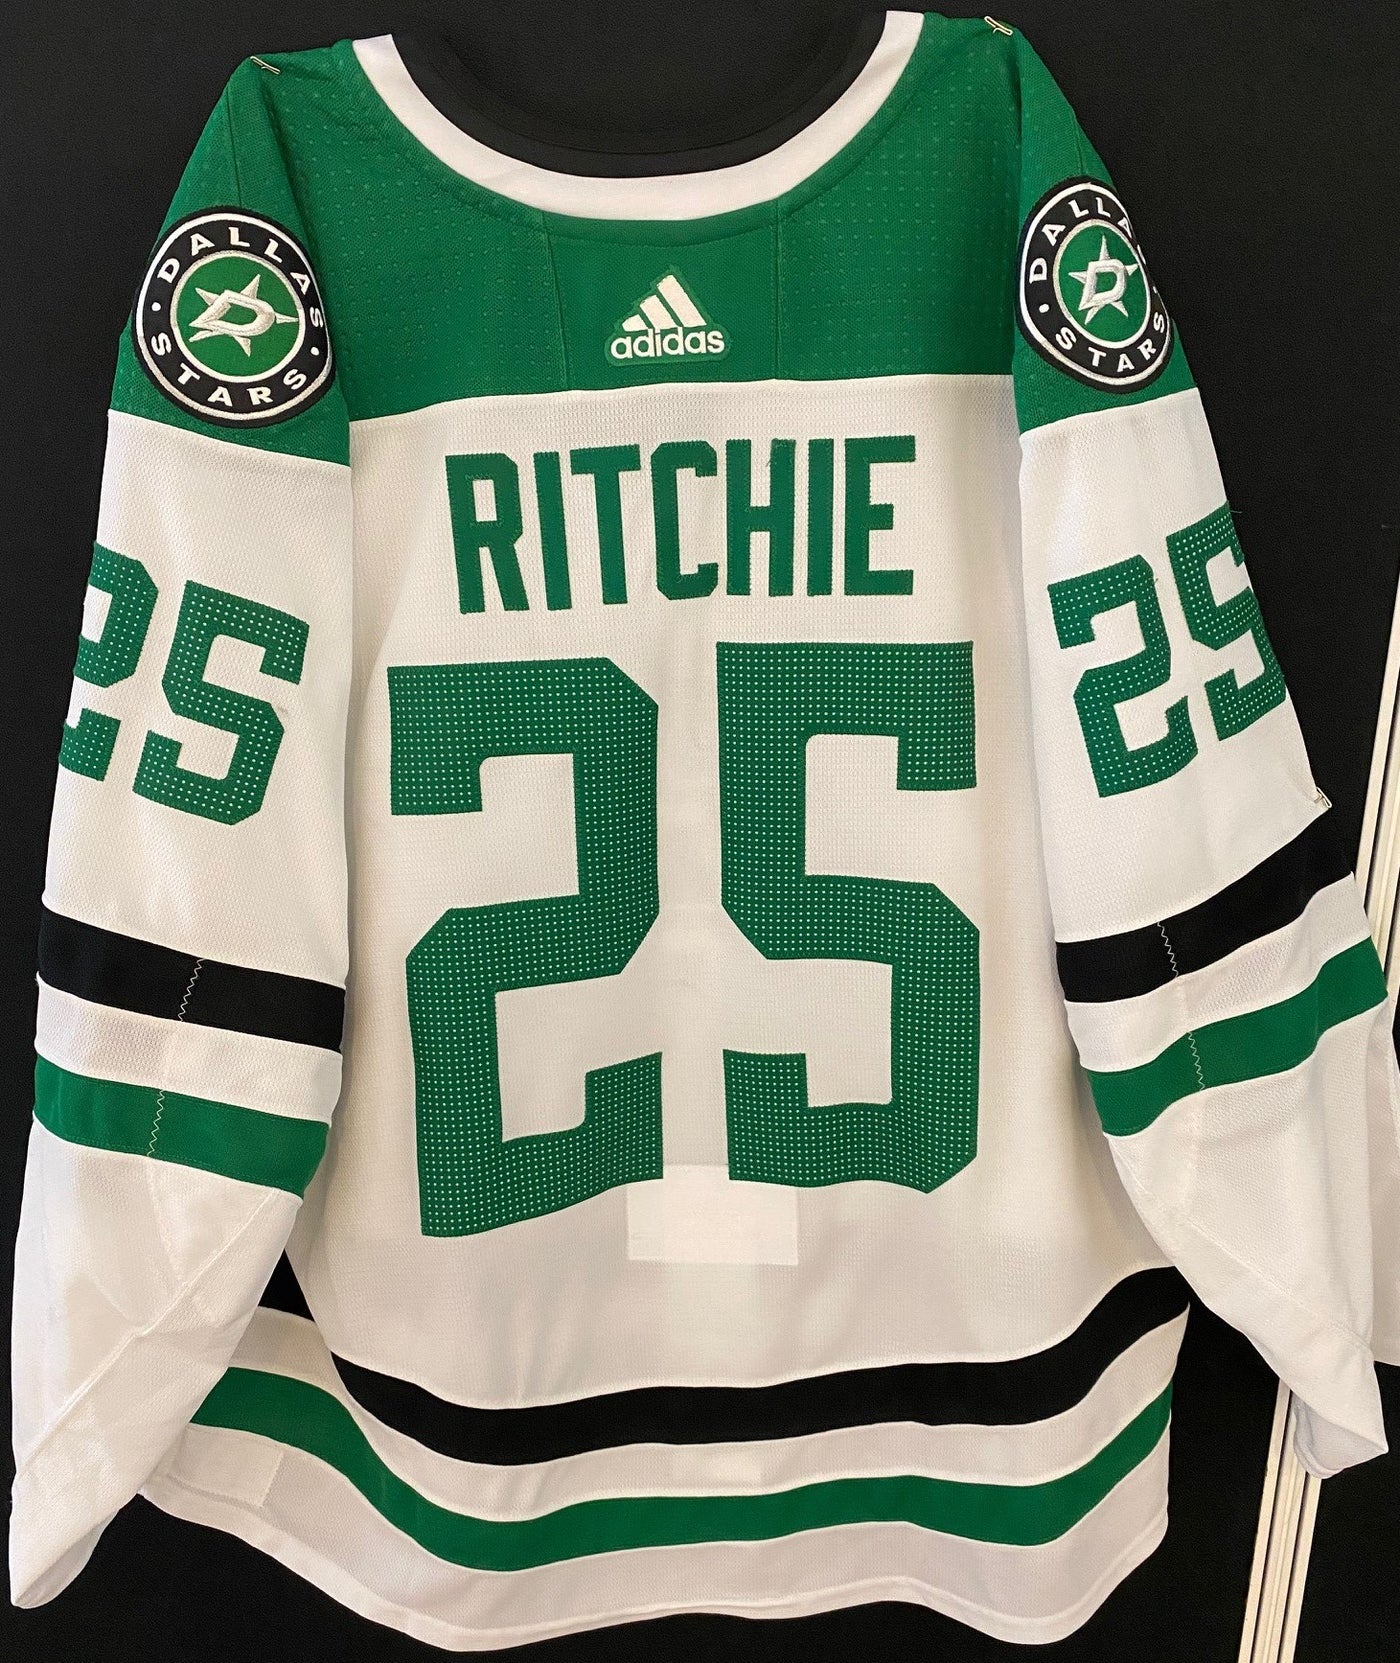 Brett Ritchie 18/19 Game Worn Away Jersey - Set 3 in Green and White - Back View